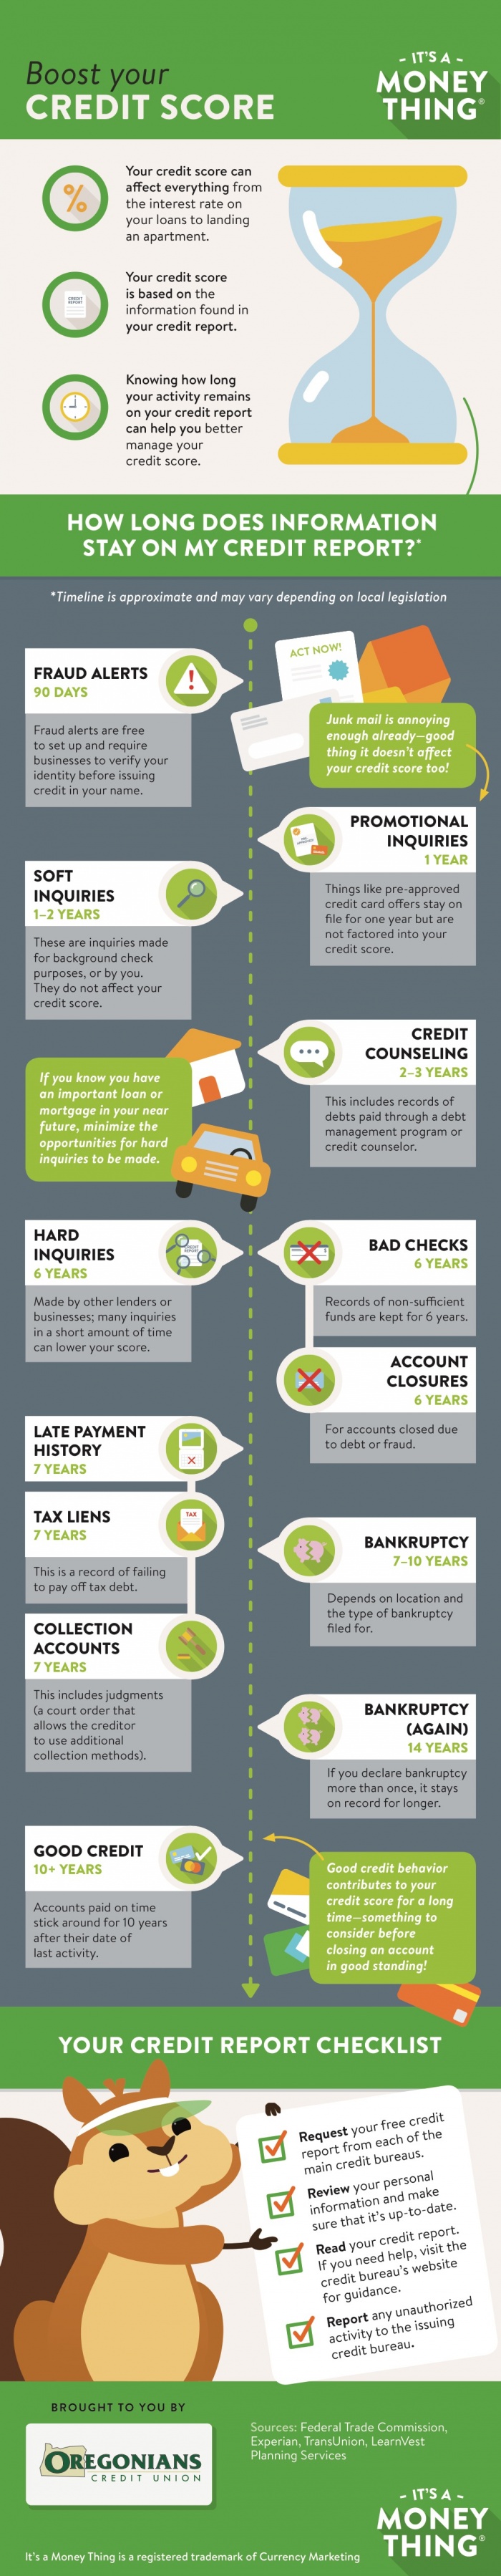 Boosting Your Credit Score Infographic